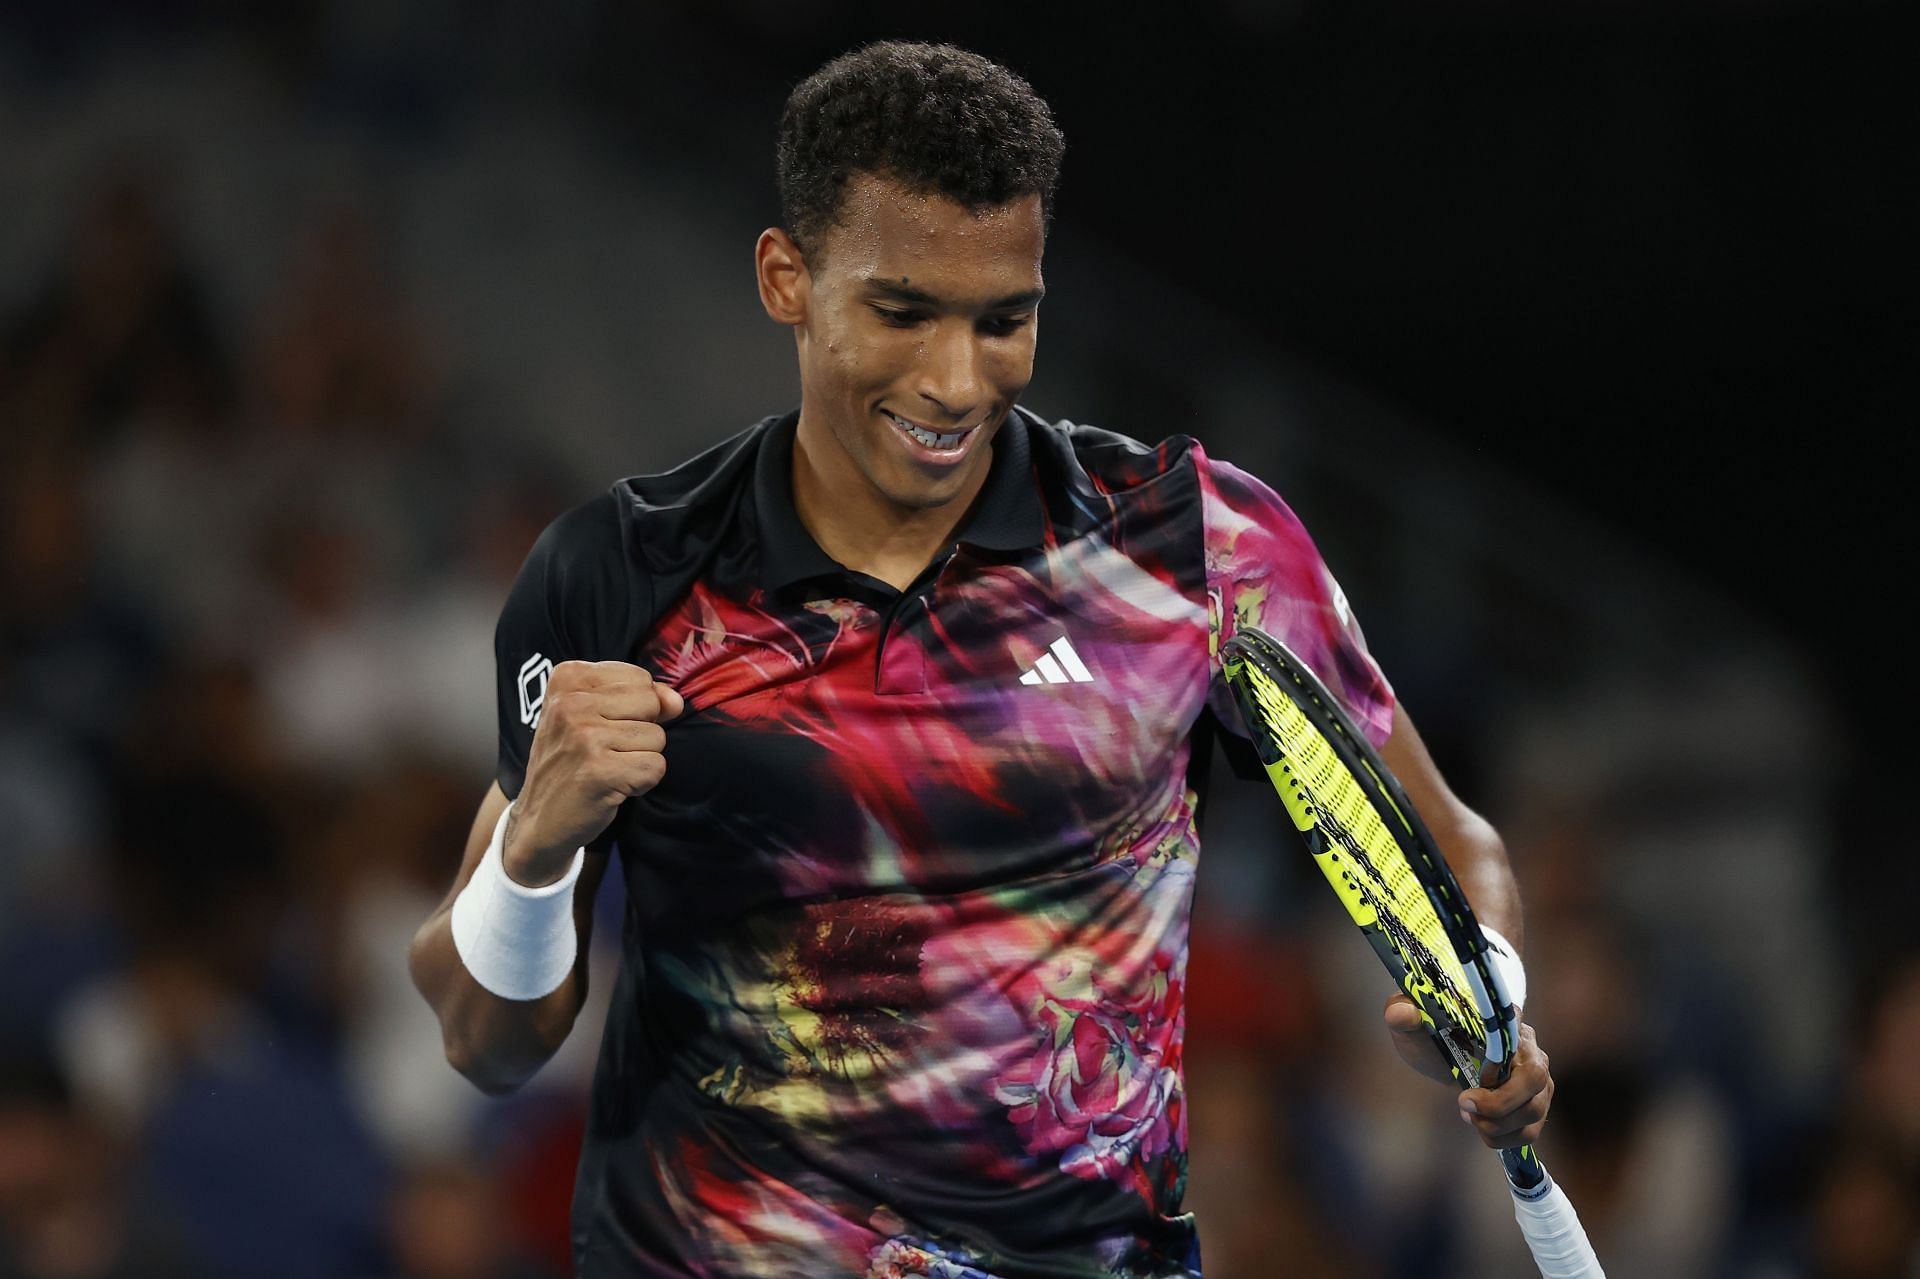 Felix Auger-Aliassime is the defending champion at the ABN AMRO Open.